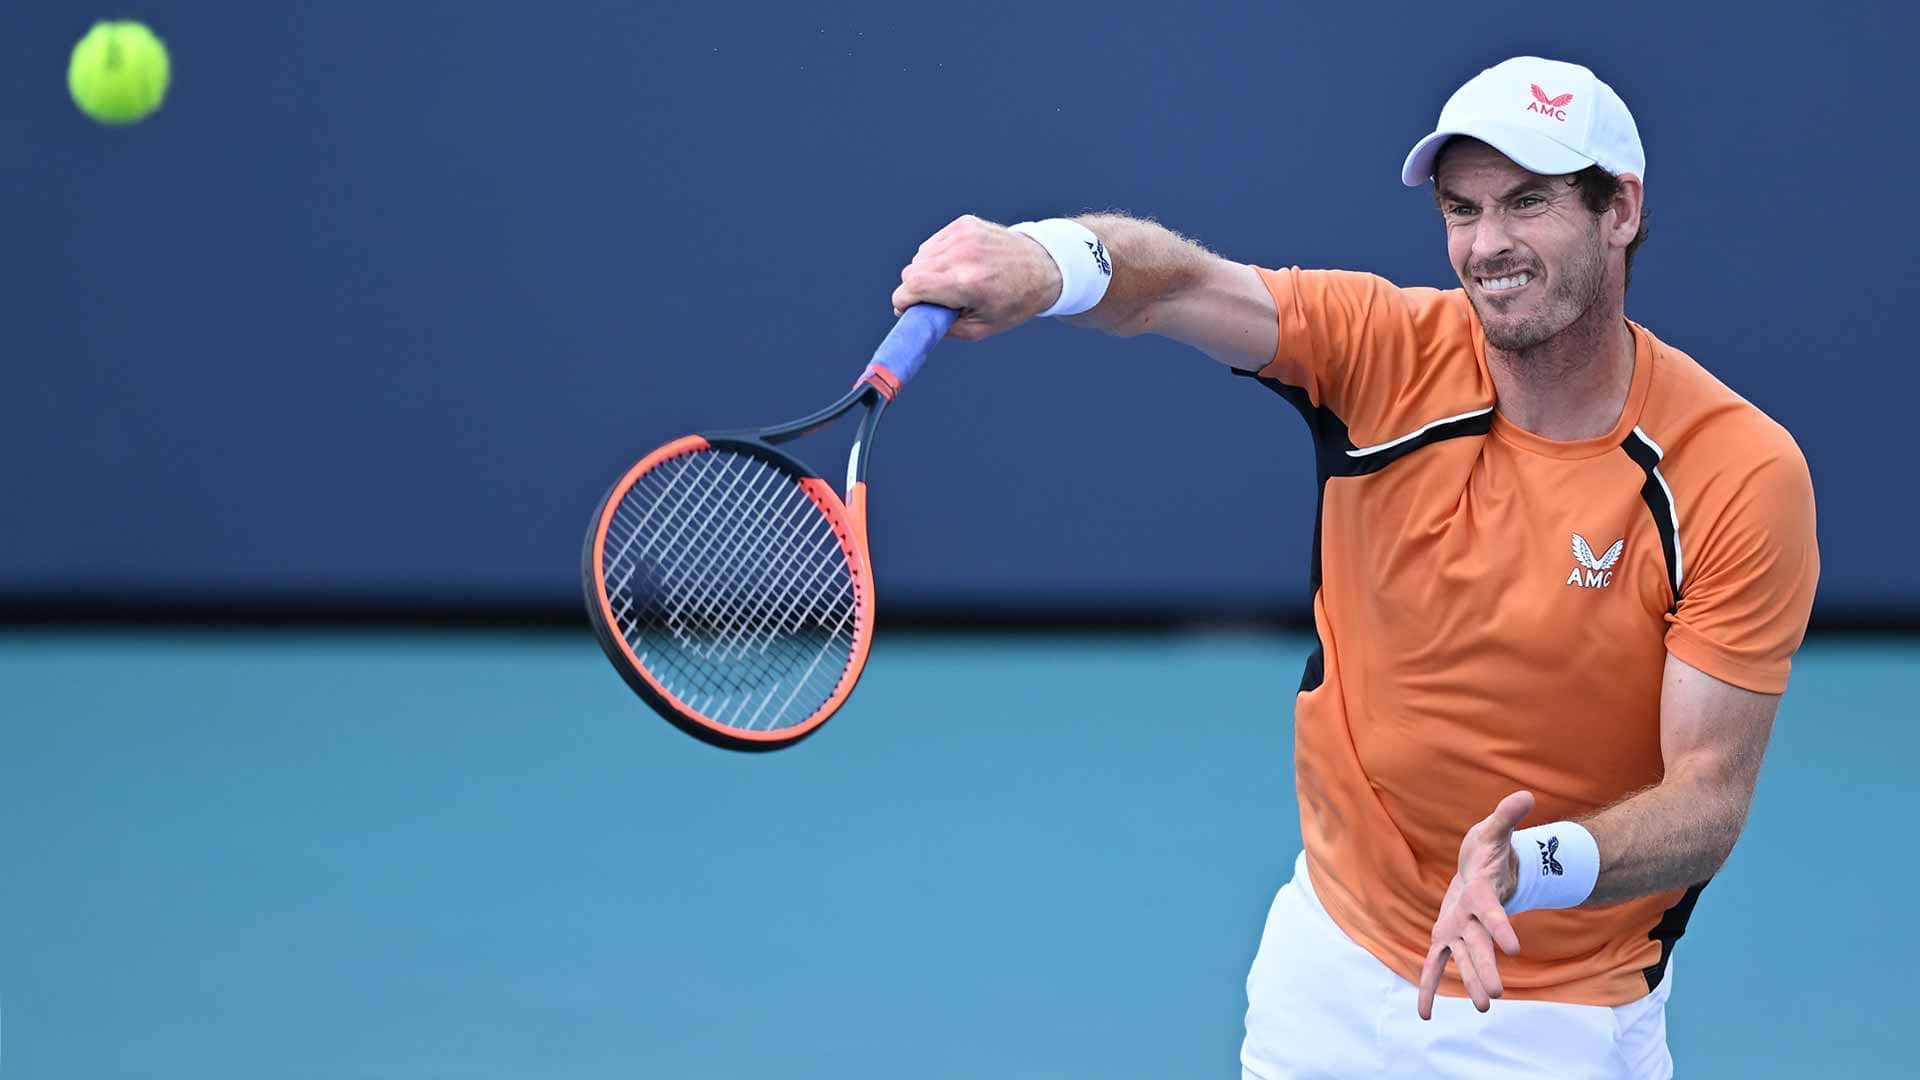 Murray confirms he will retire after Paris Olympics